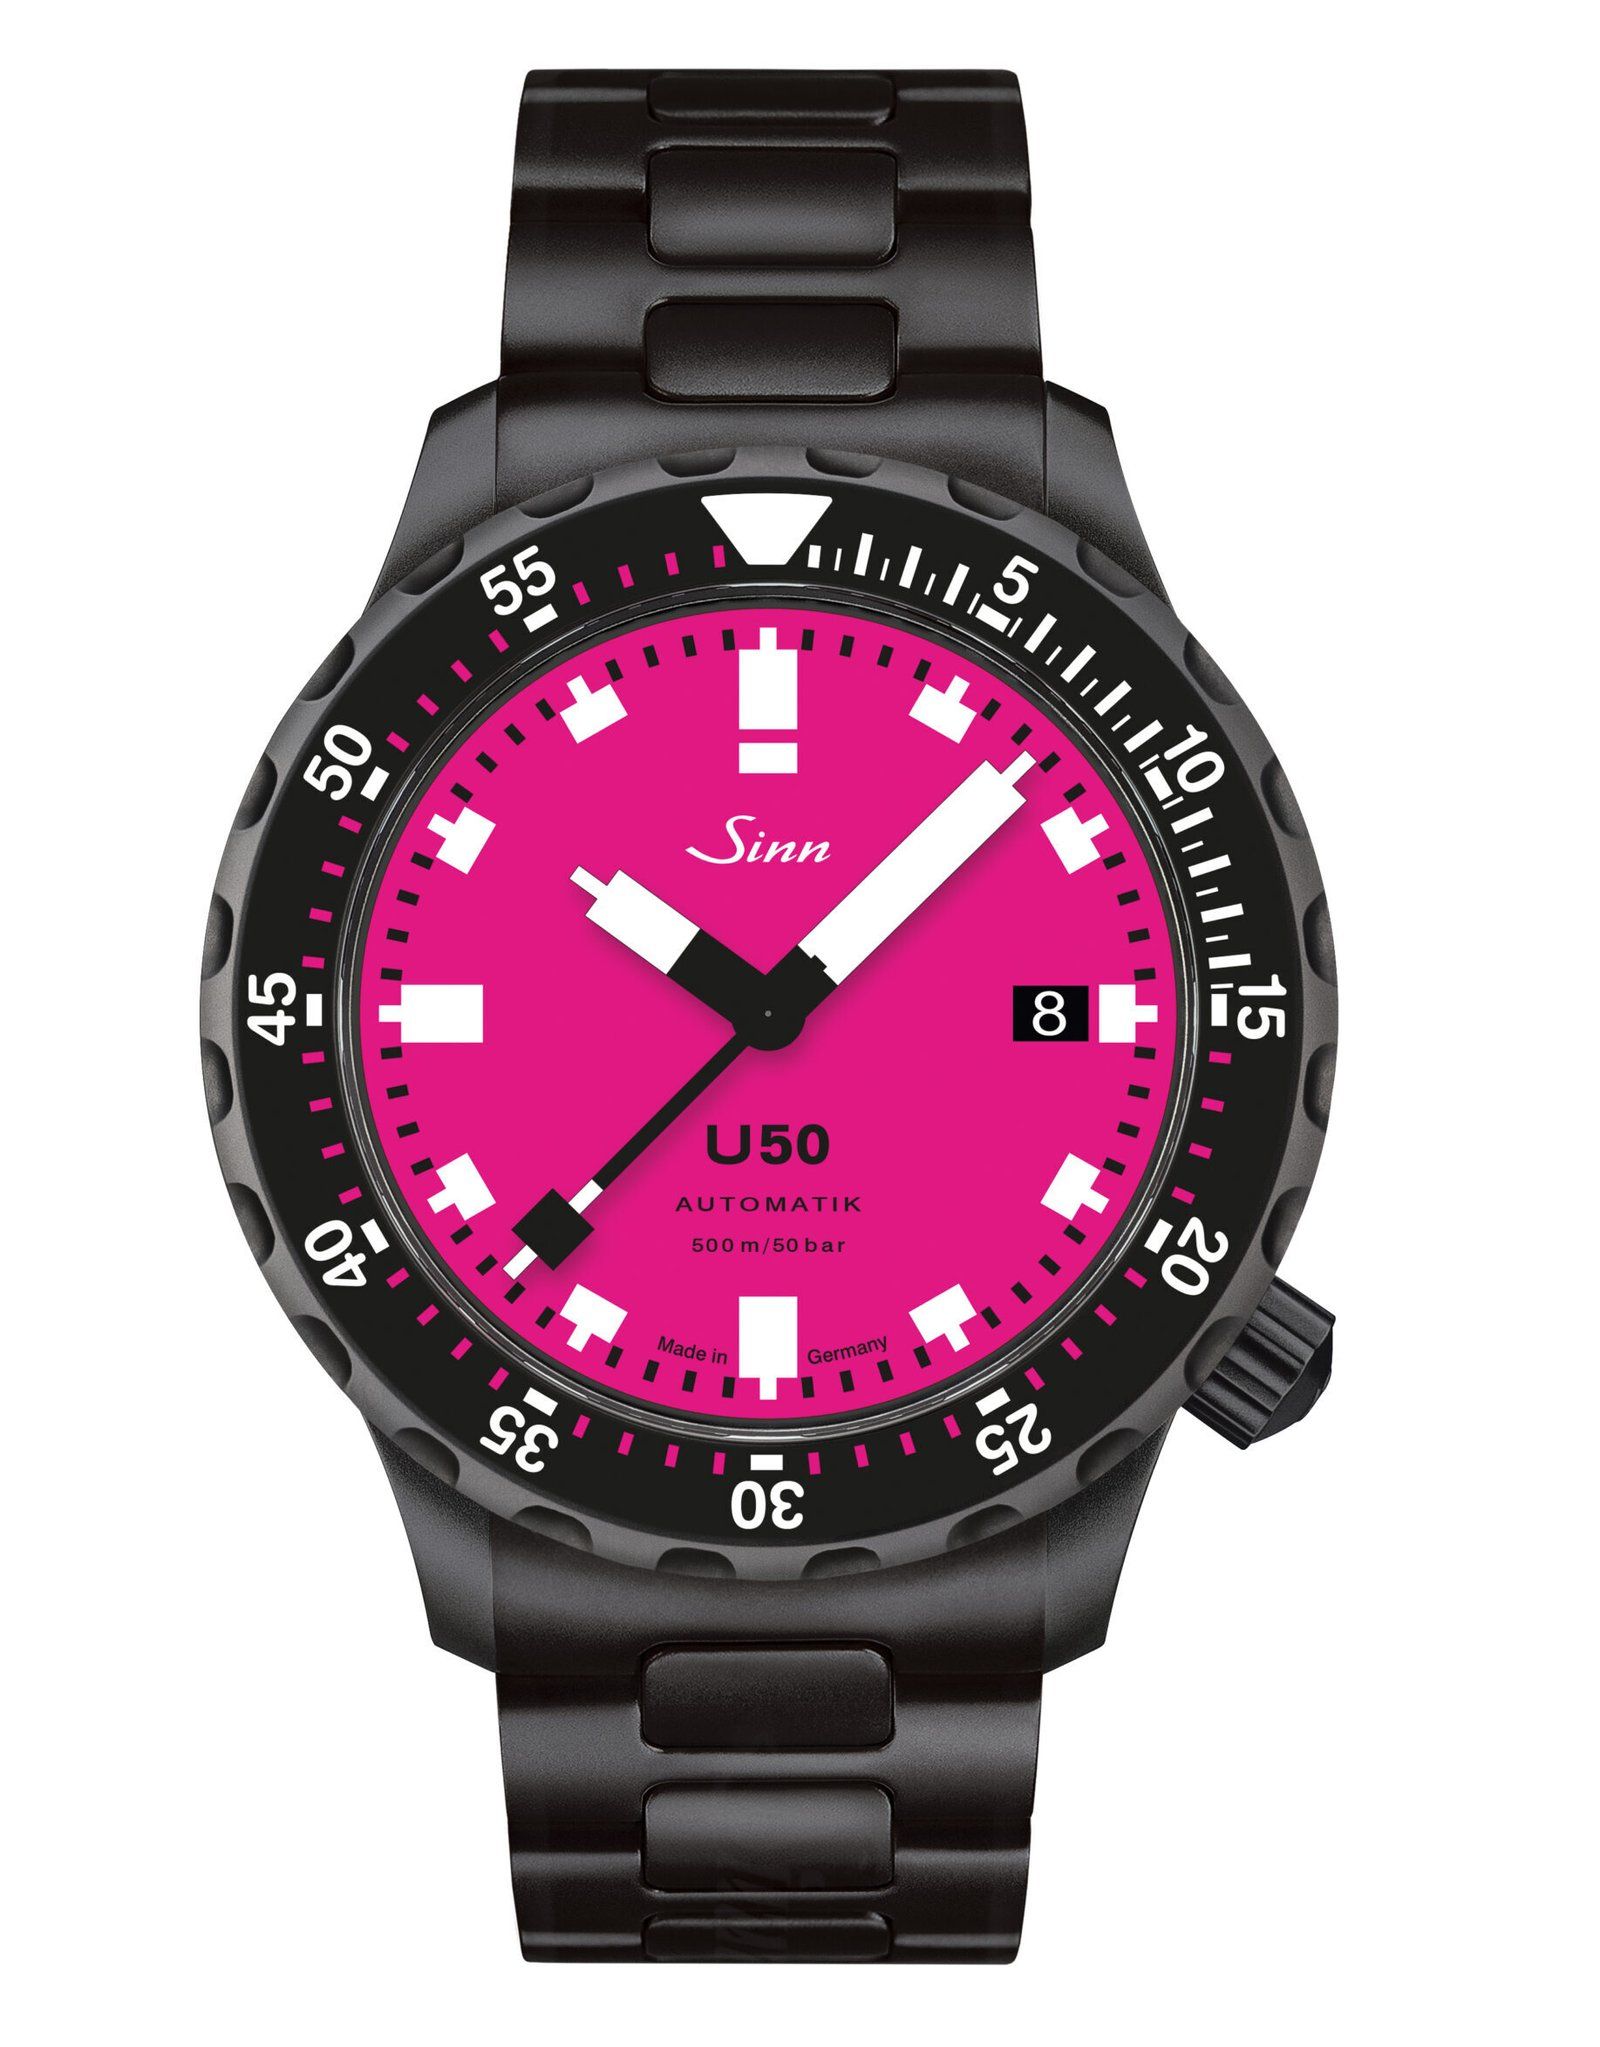 The Pink Dial Project